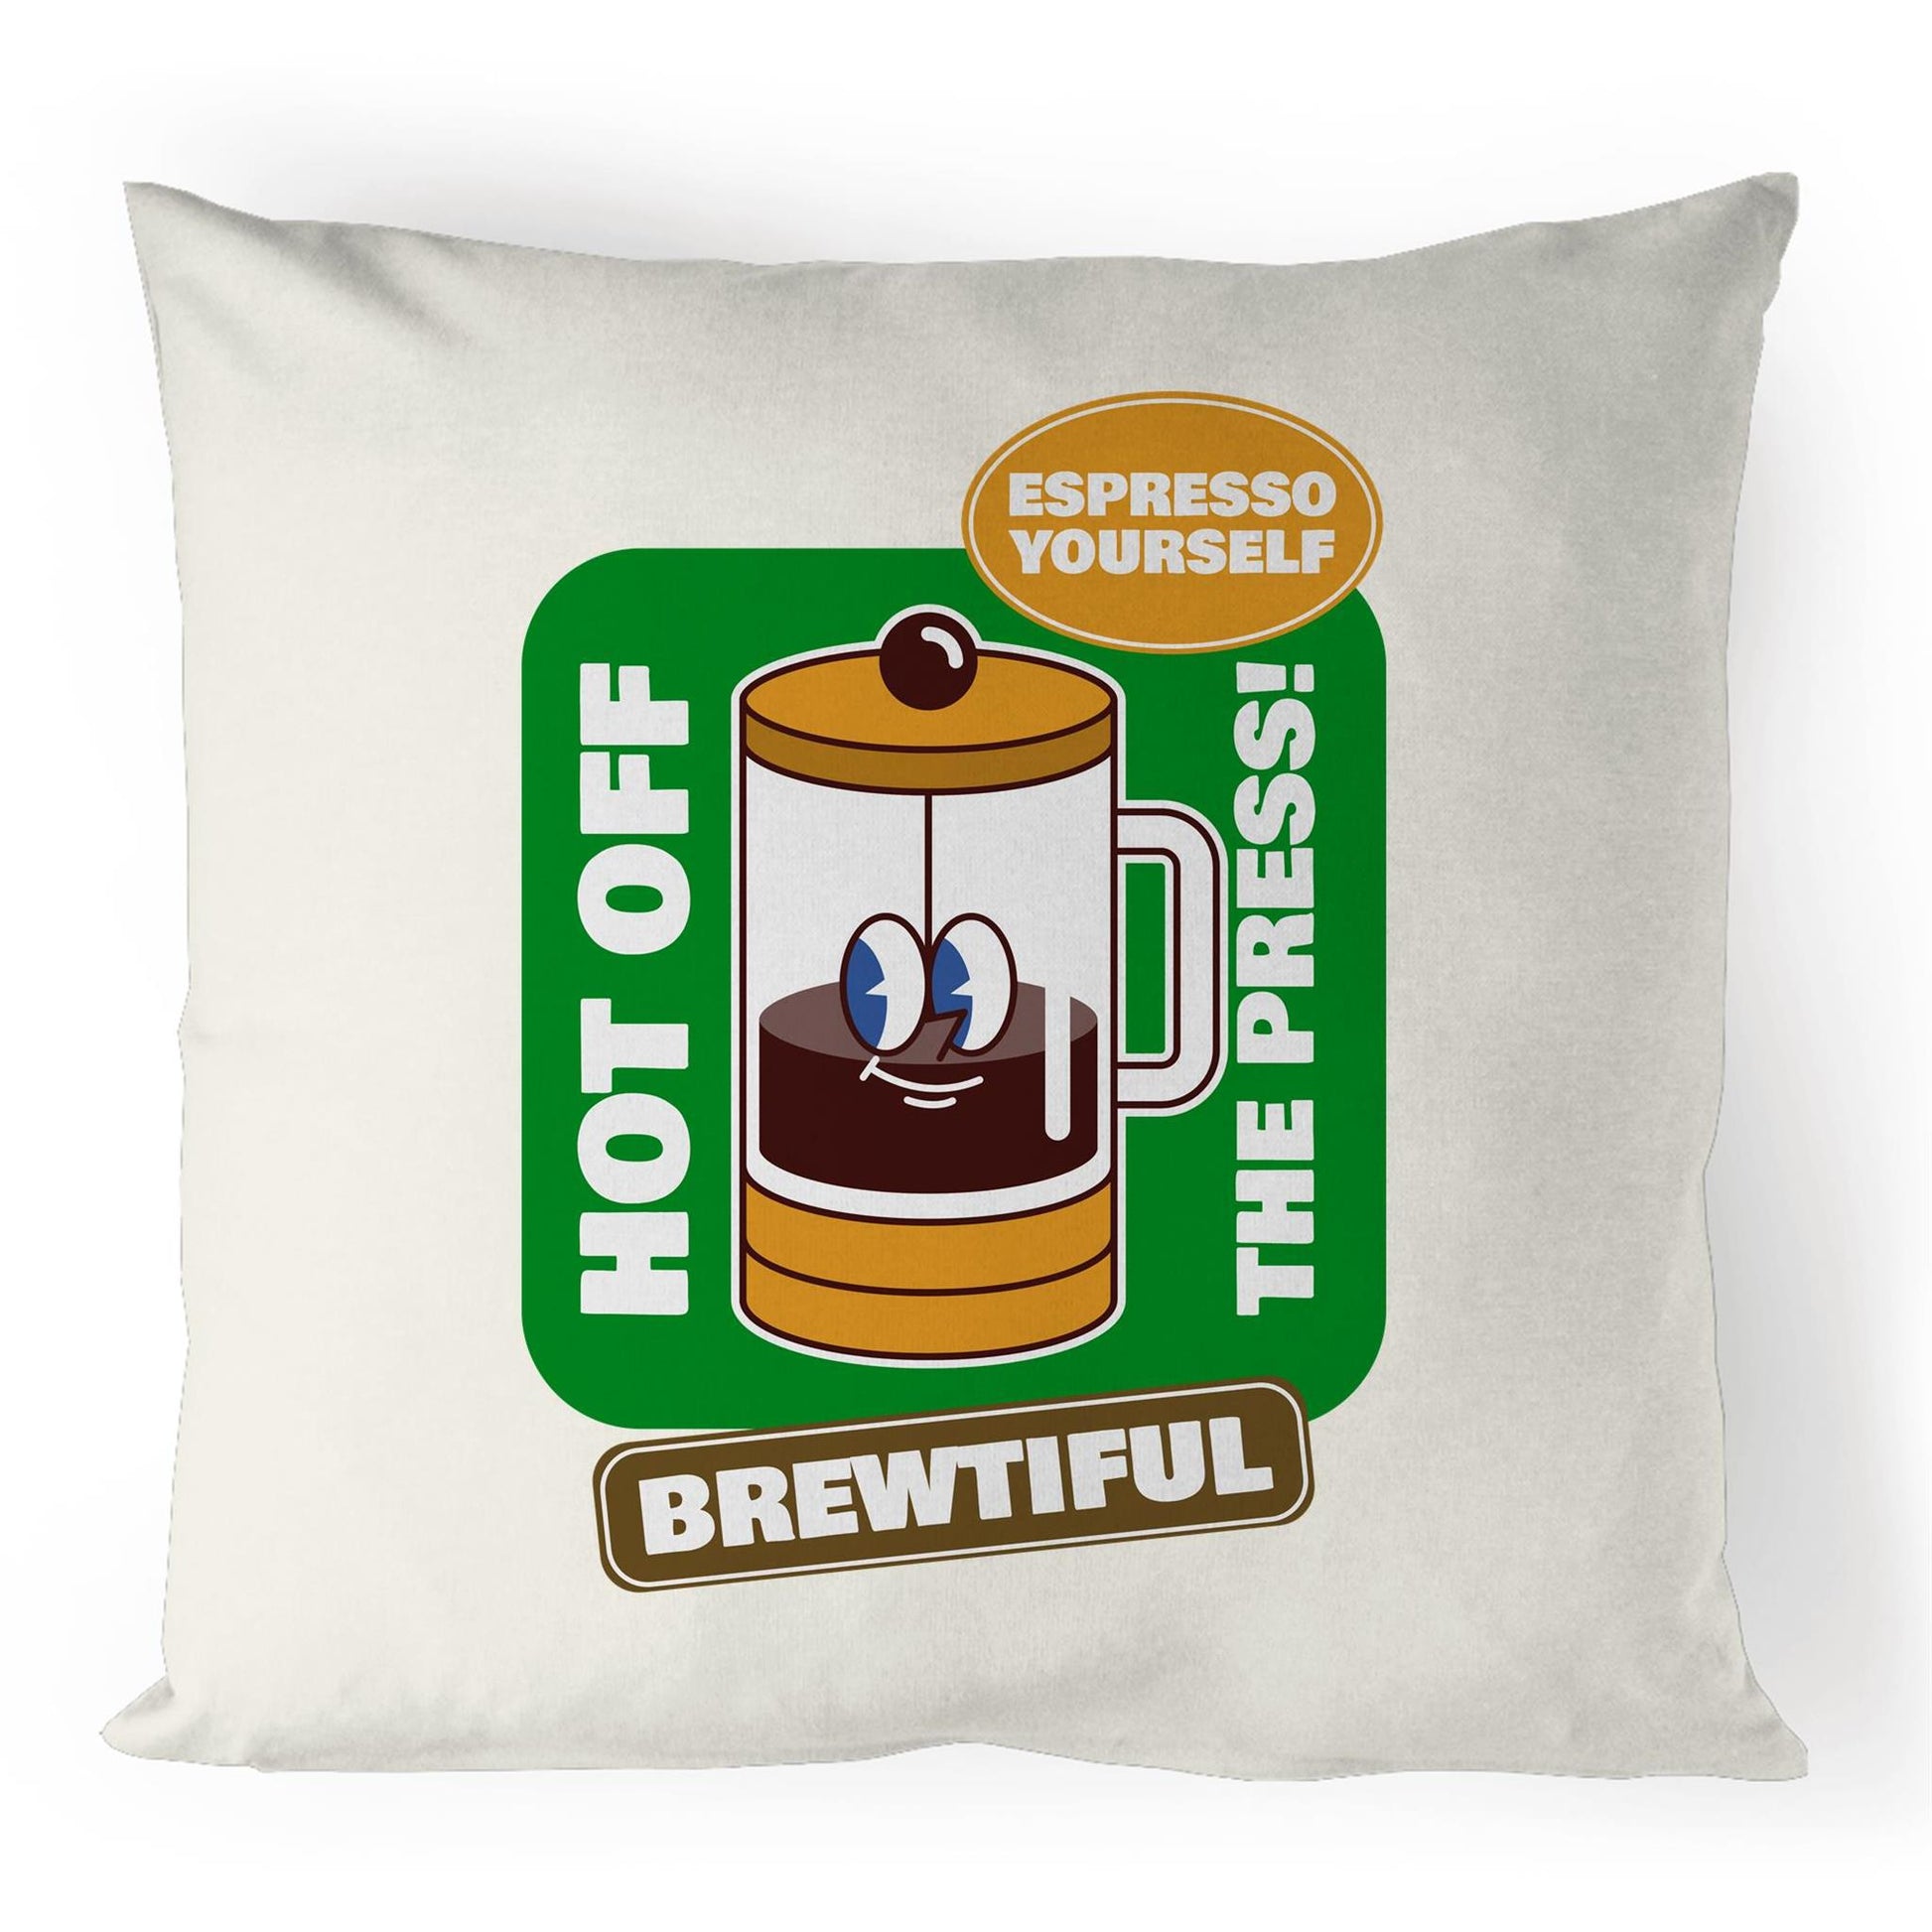 Brewtiful, Espresso Yourself - 100% Linen Cushion Cover Default Title Linen Cushion Cover Coffee